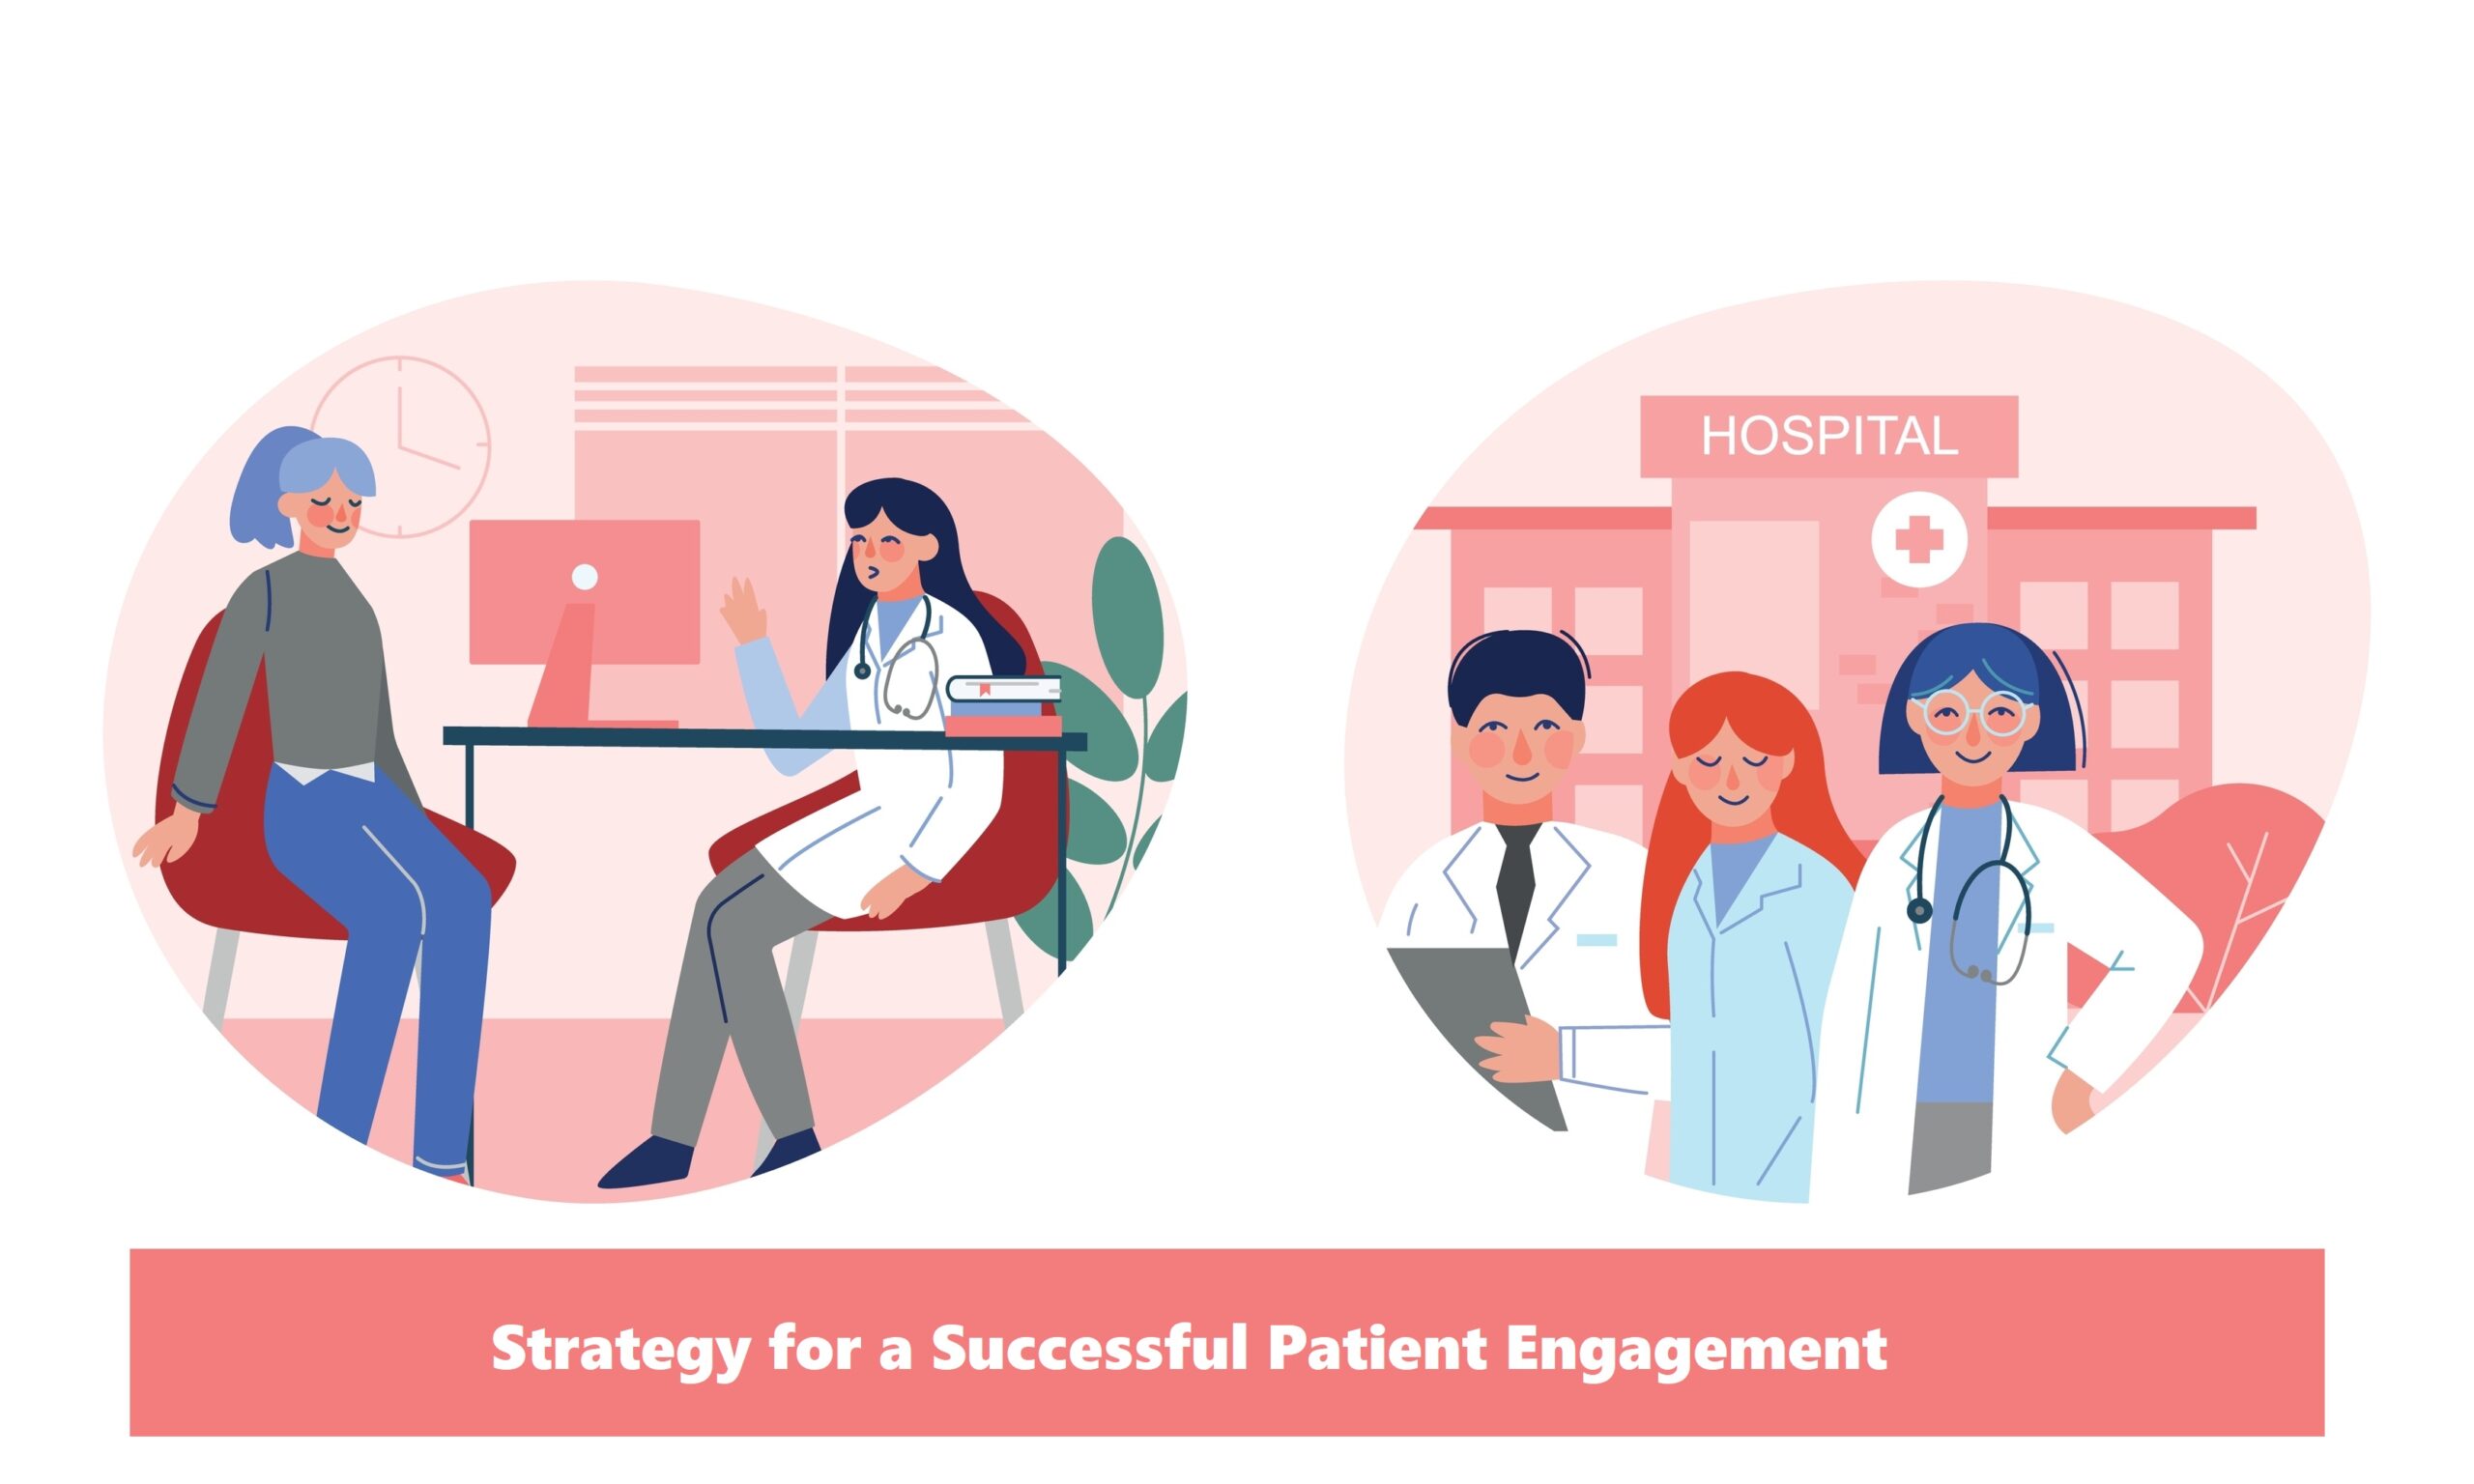 What is Patient Engagement?